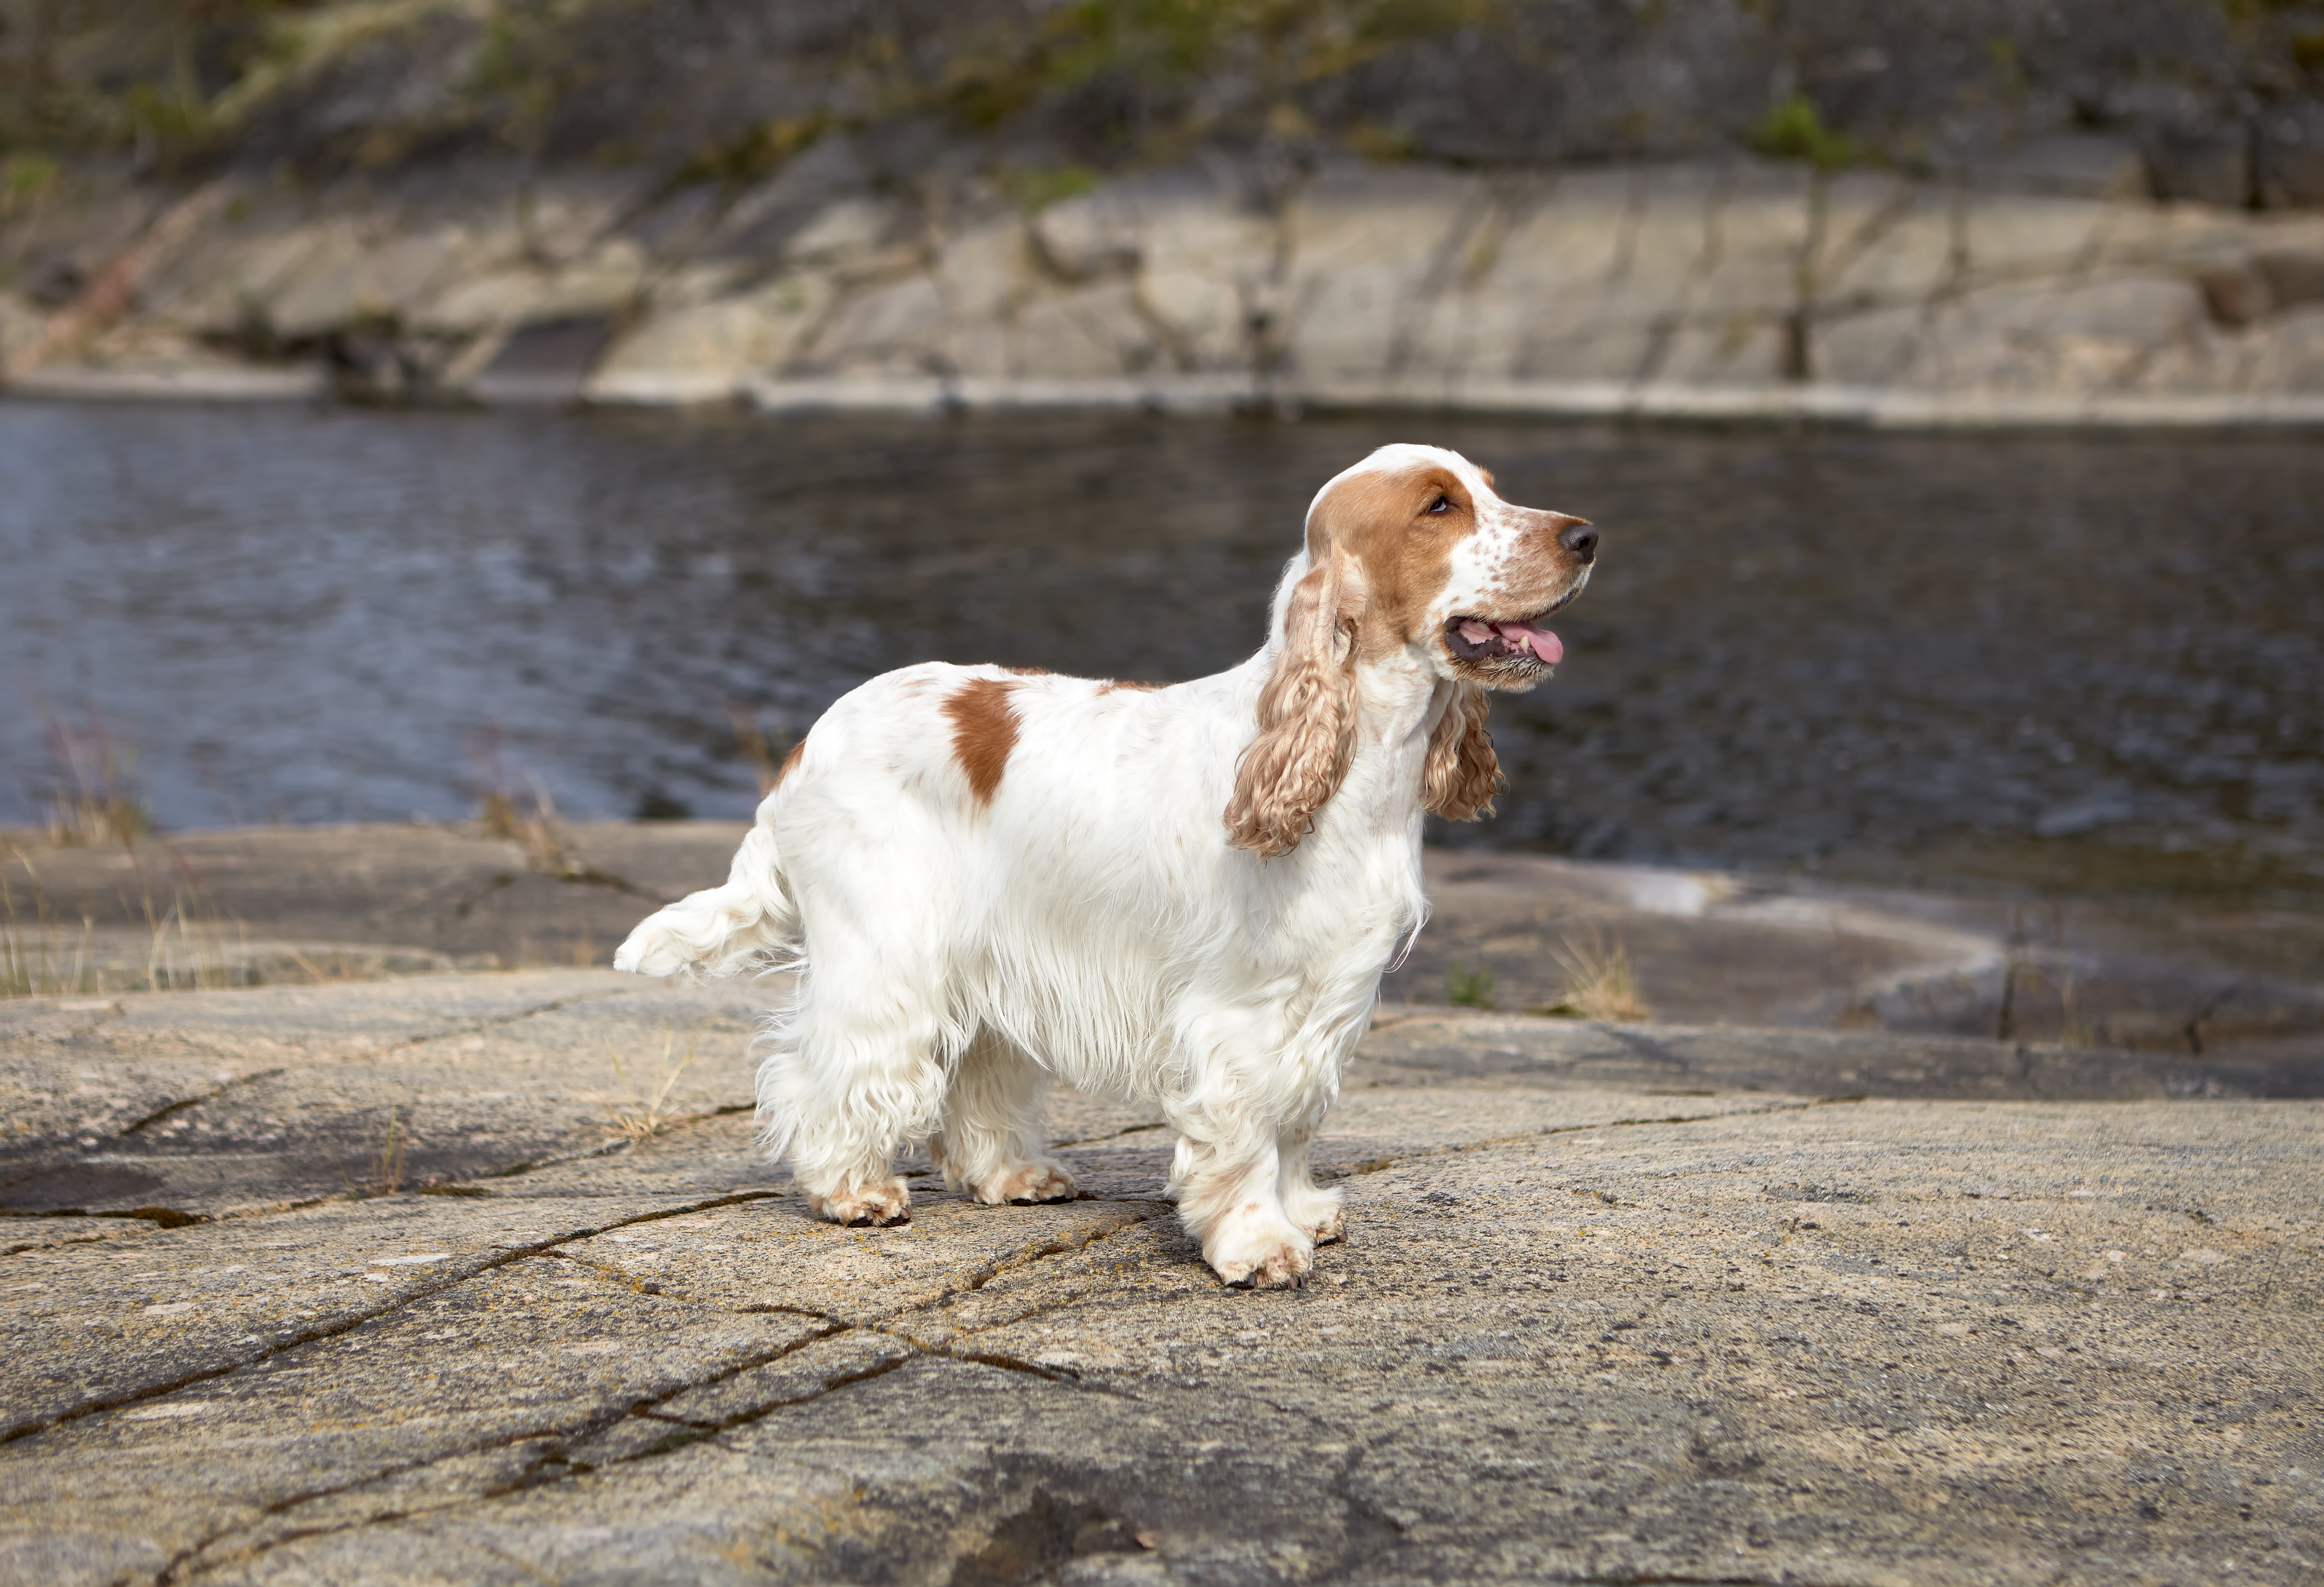 A white and brown cocker spaniel stands on a rocky surface by a body of water, looking to the right with its mouth open